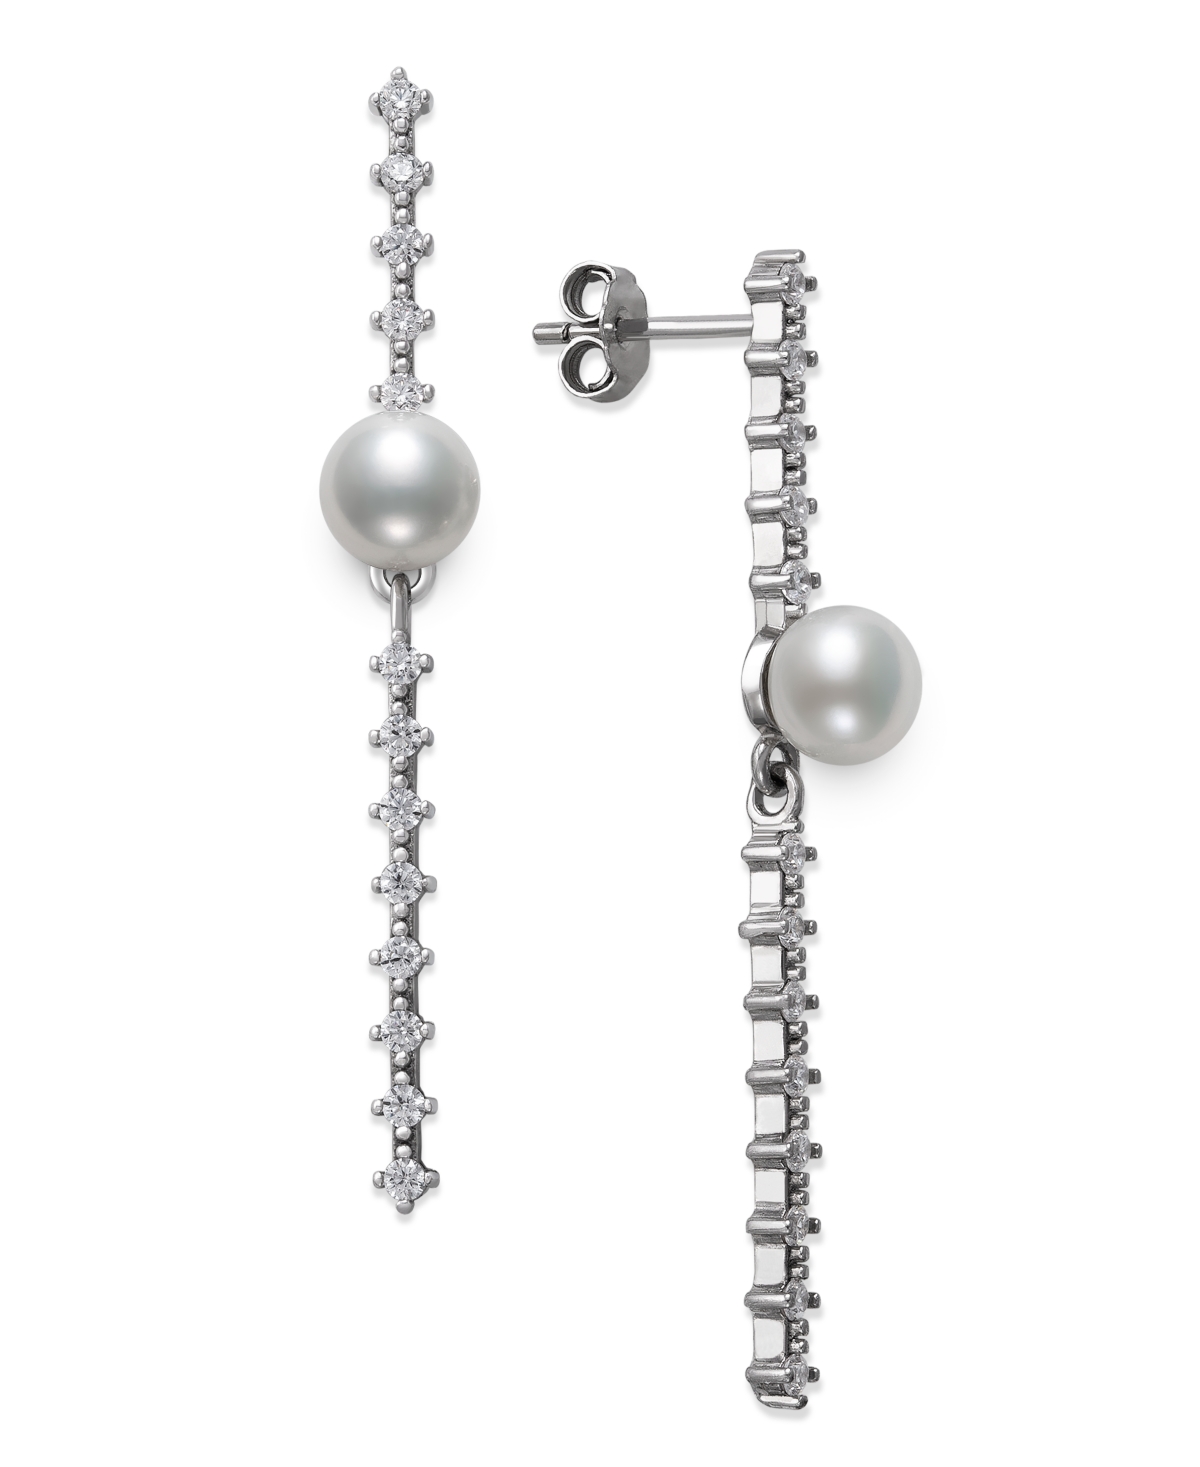 Cultured Freshwater Button Pearl (6mm) & Cubic Zirconia Linear Drop Earrings in Sterling Silver, Created for Macy's - Sterling Silver